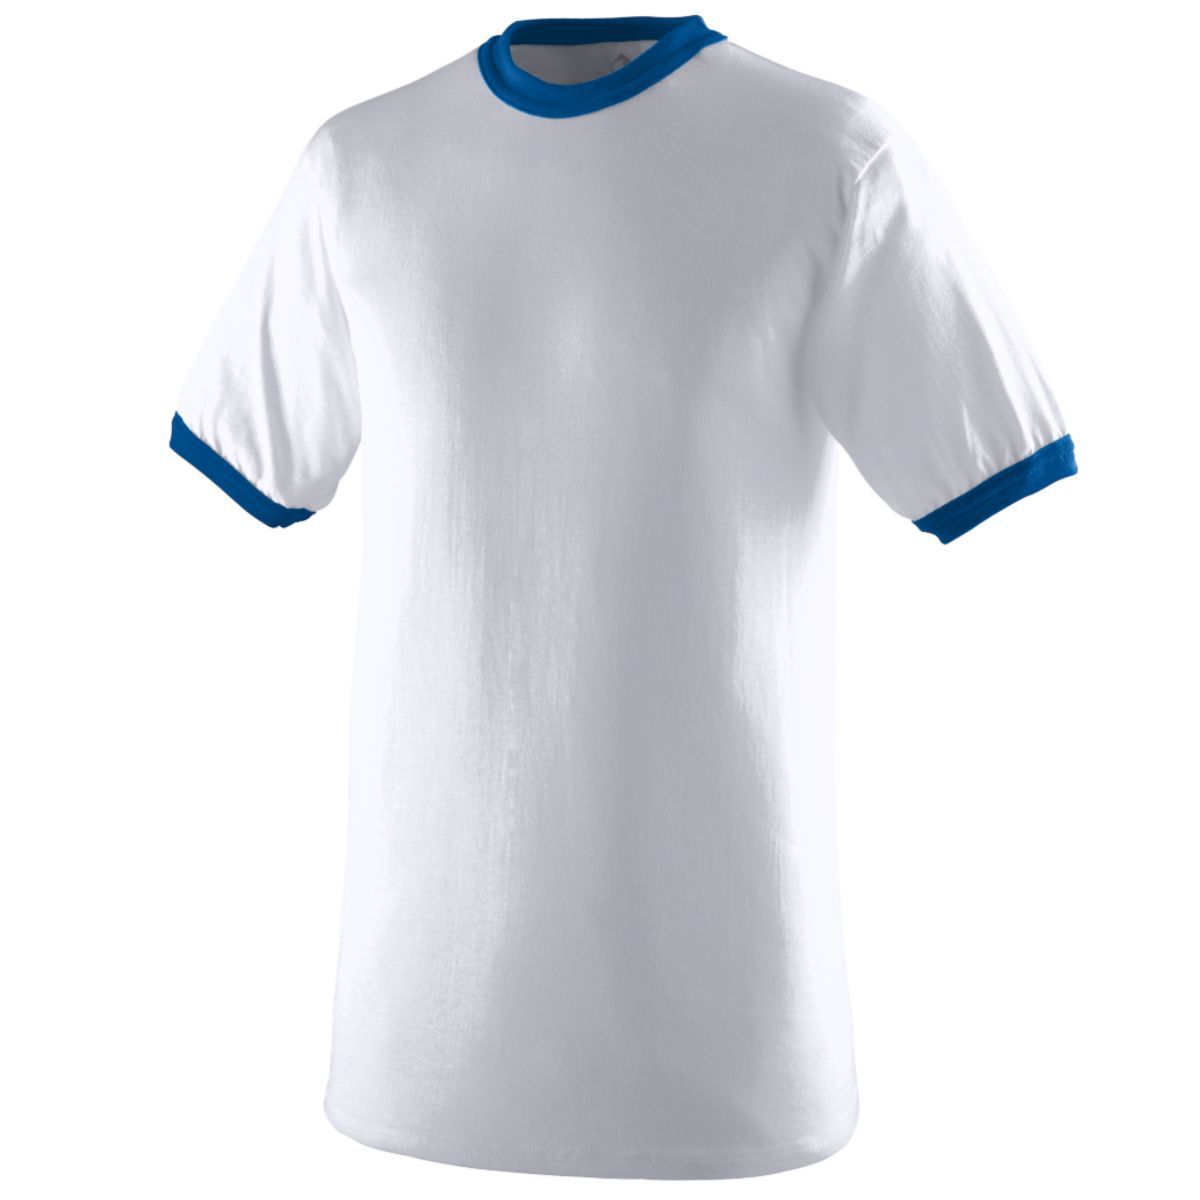 Augusta Sportswear Youth-Ringer T-Shirt in White/Royal  -Part of the Youth, Youth-Tee-Shirt, T-Shirts, Augusta-Products, Soccer, Shirts, All-Sports-1 product lines at KanaleyCreations.com